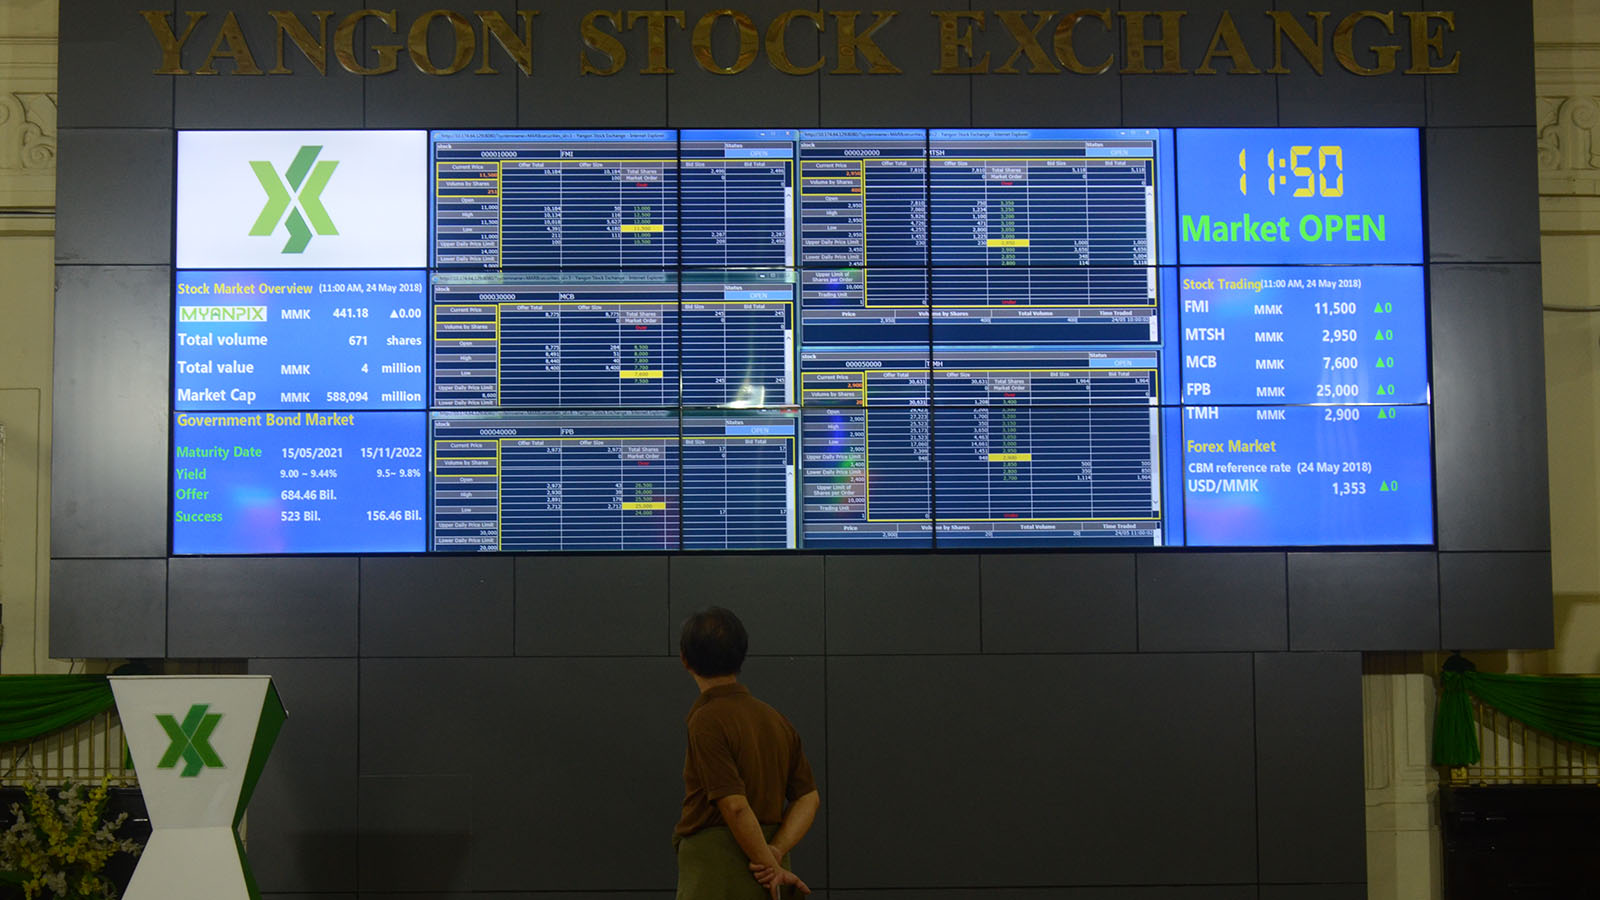 First Myanmar Investment (FMI) share trading will be suspended for five business days on Yangon Stock Exchange (YSX)